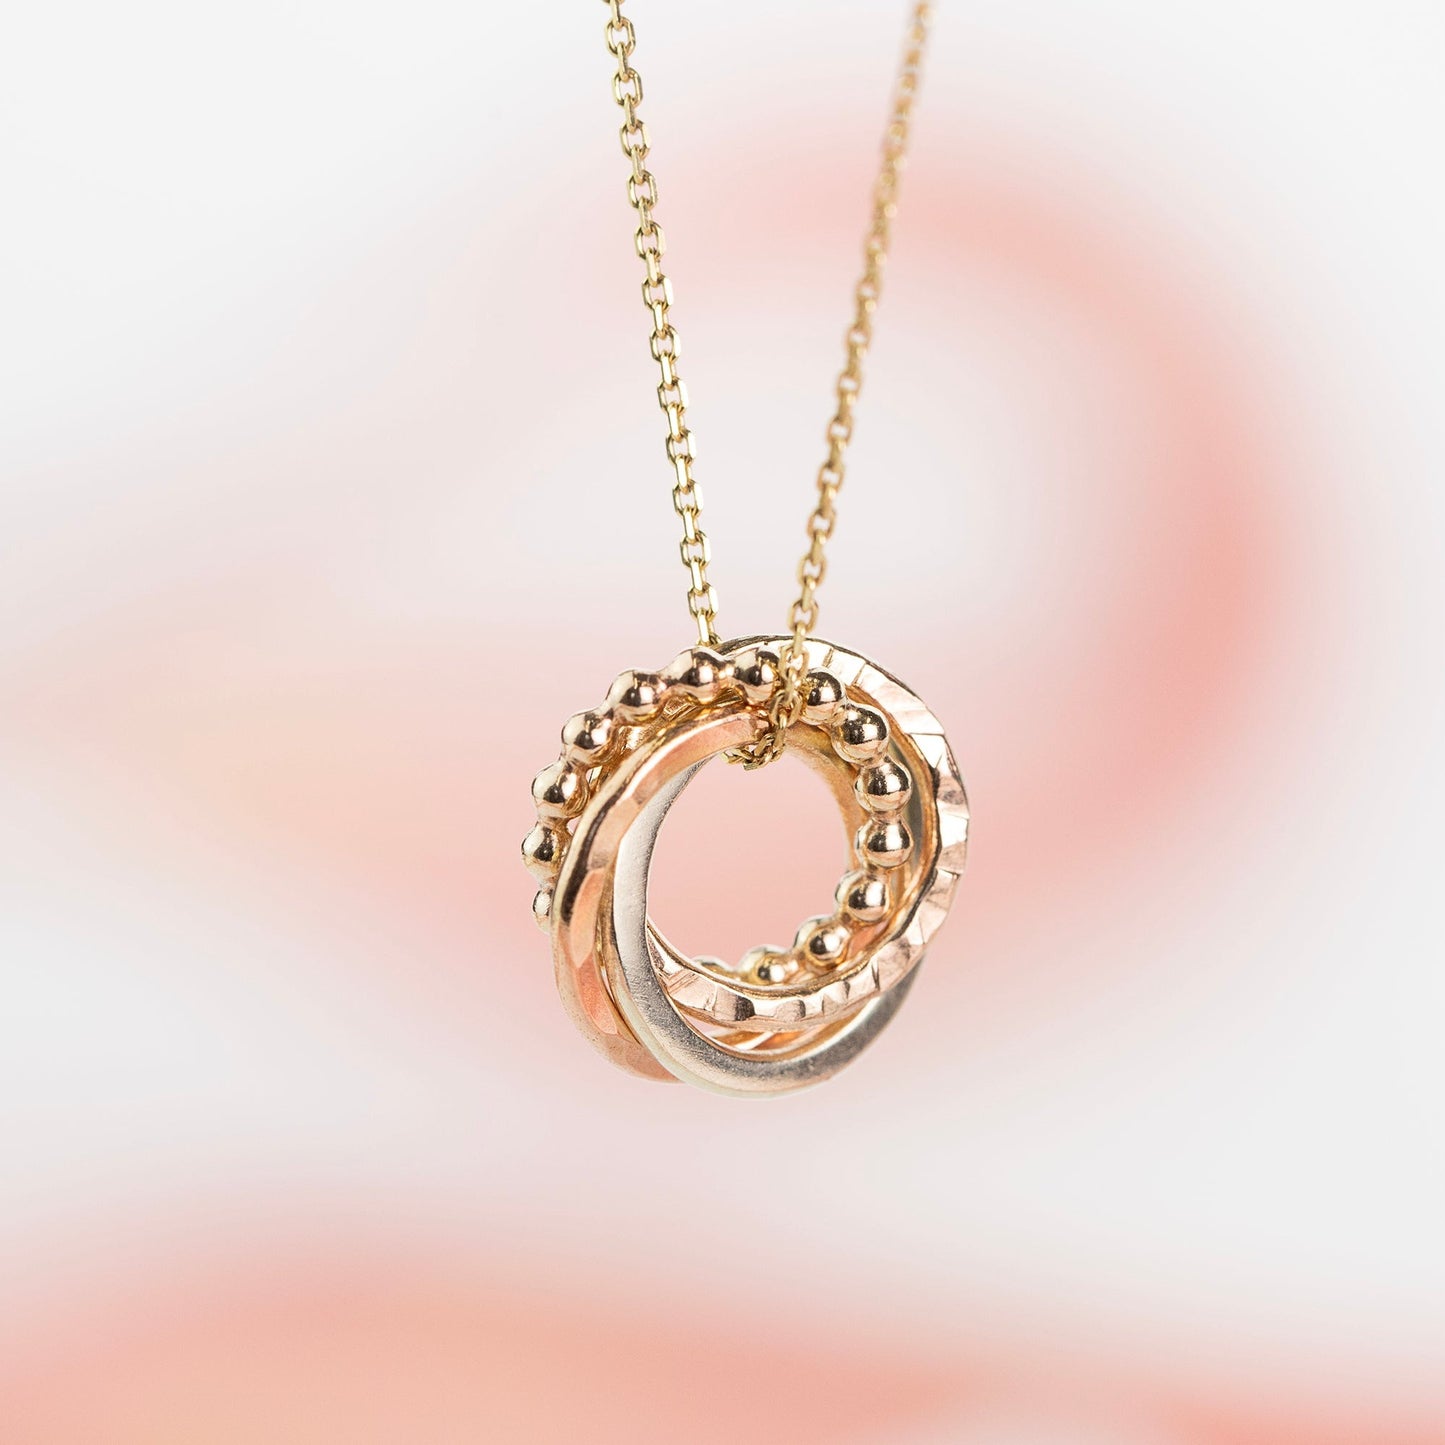 4th Anniversary Love Knot Necklace - 9kt Gold, Rose Gold & White Gold